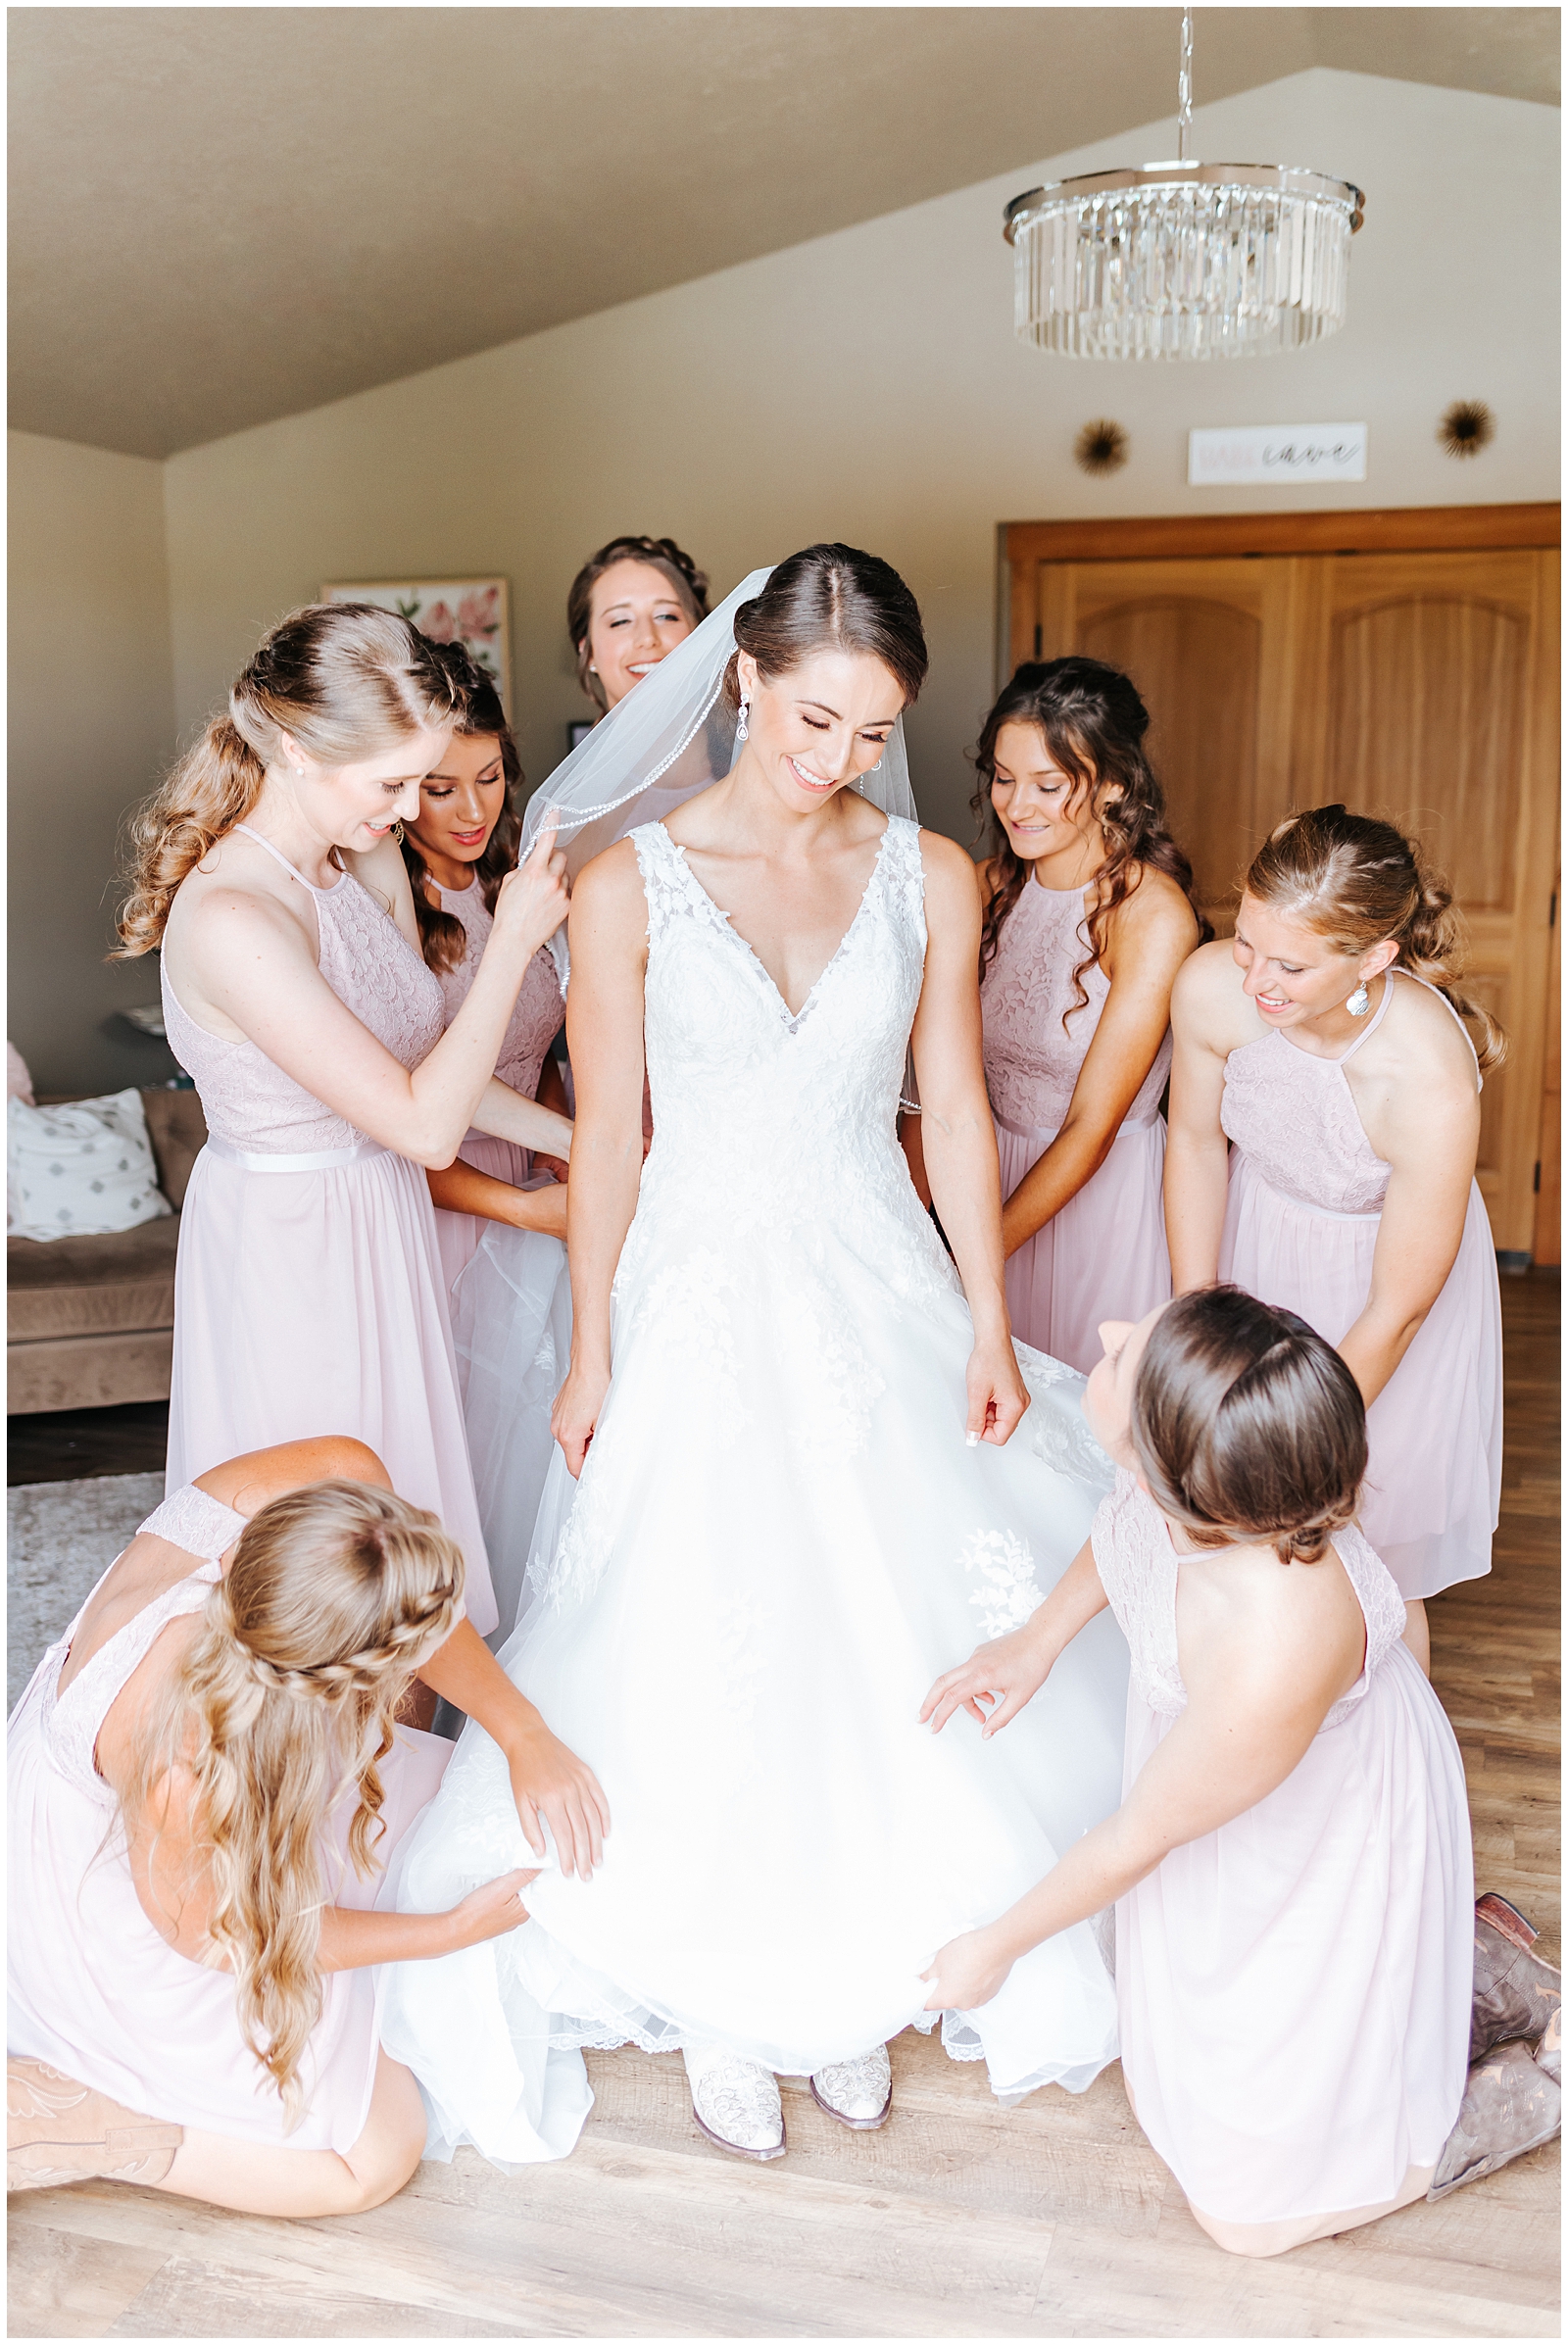 Bridesmaids helping Bride get ready at rustic chic Still Water Hollow Wedding